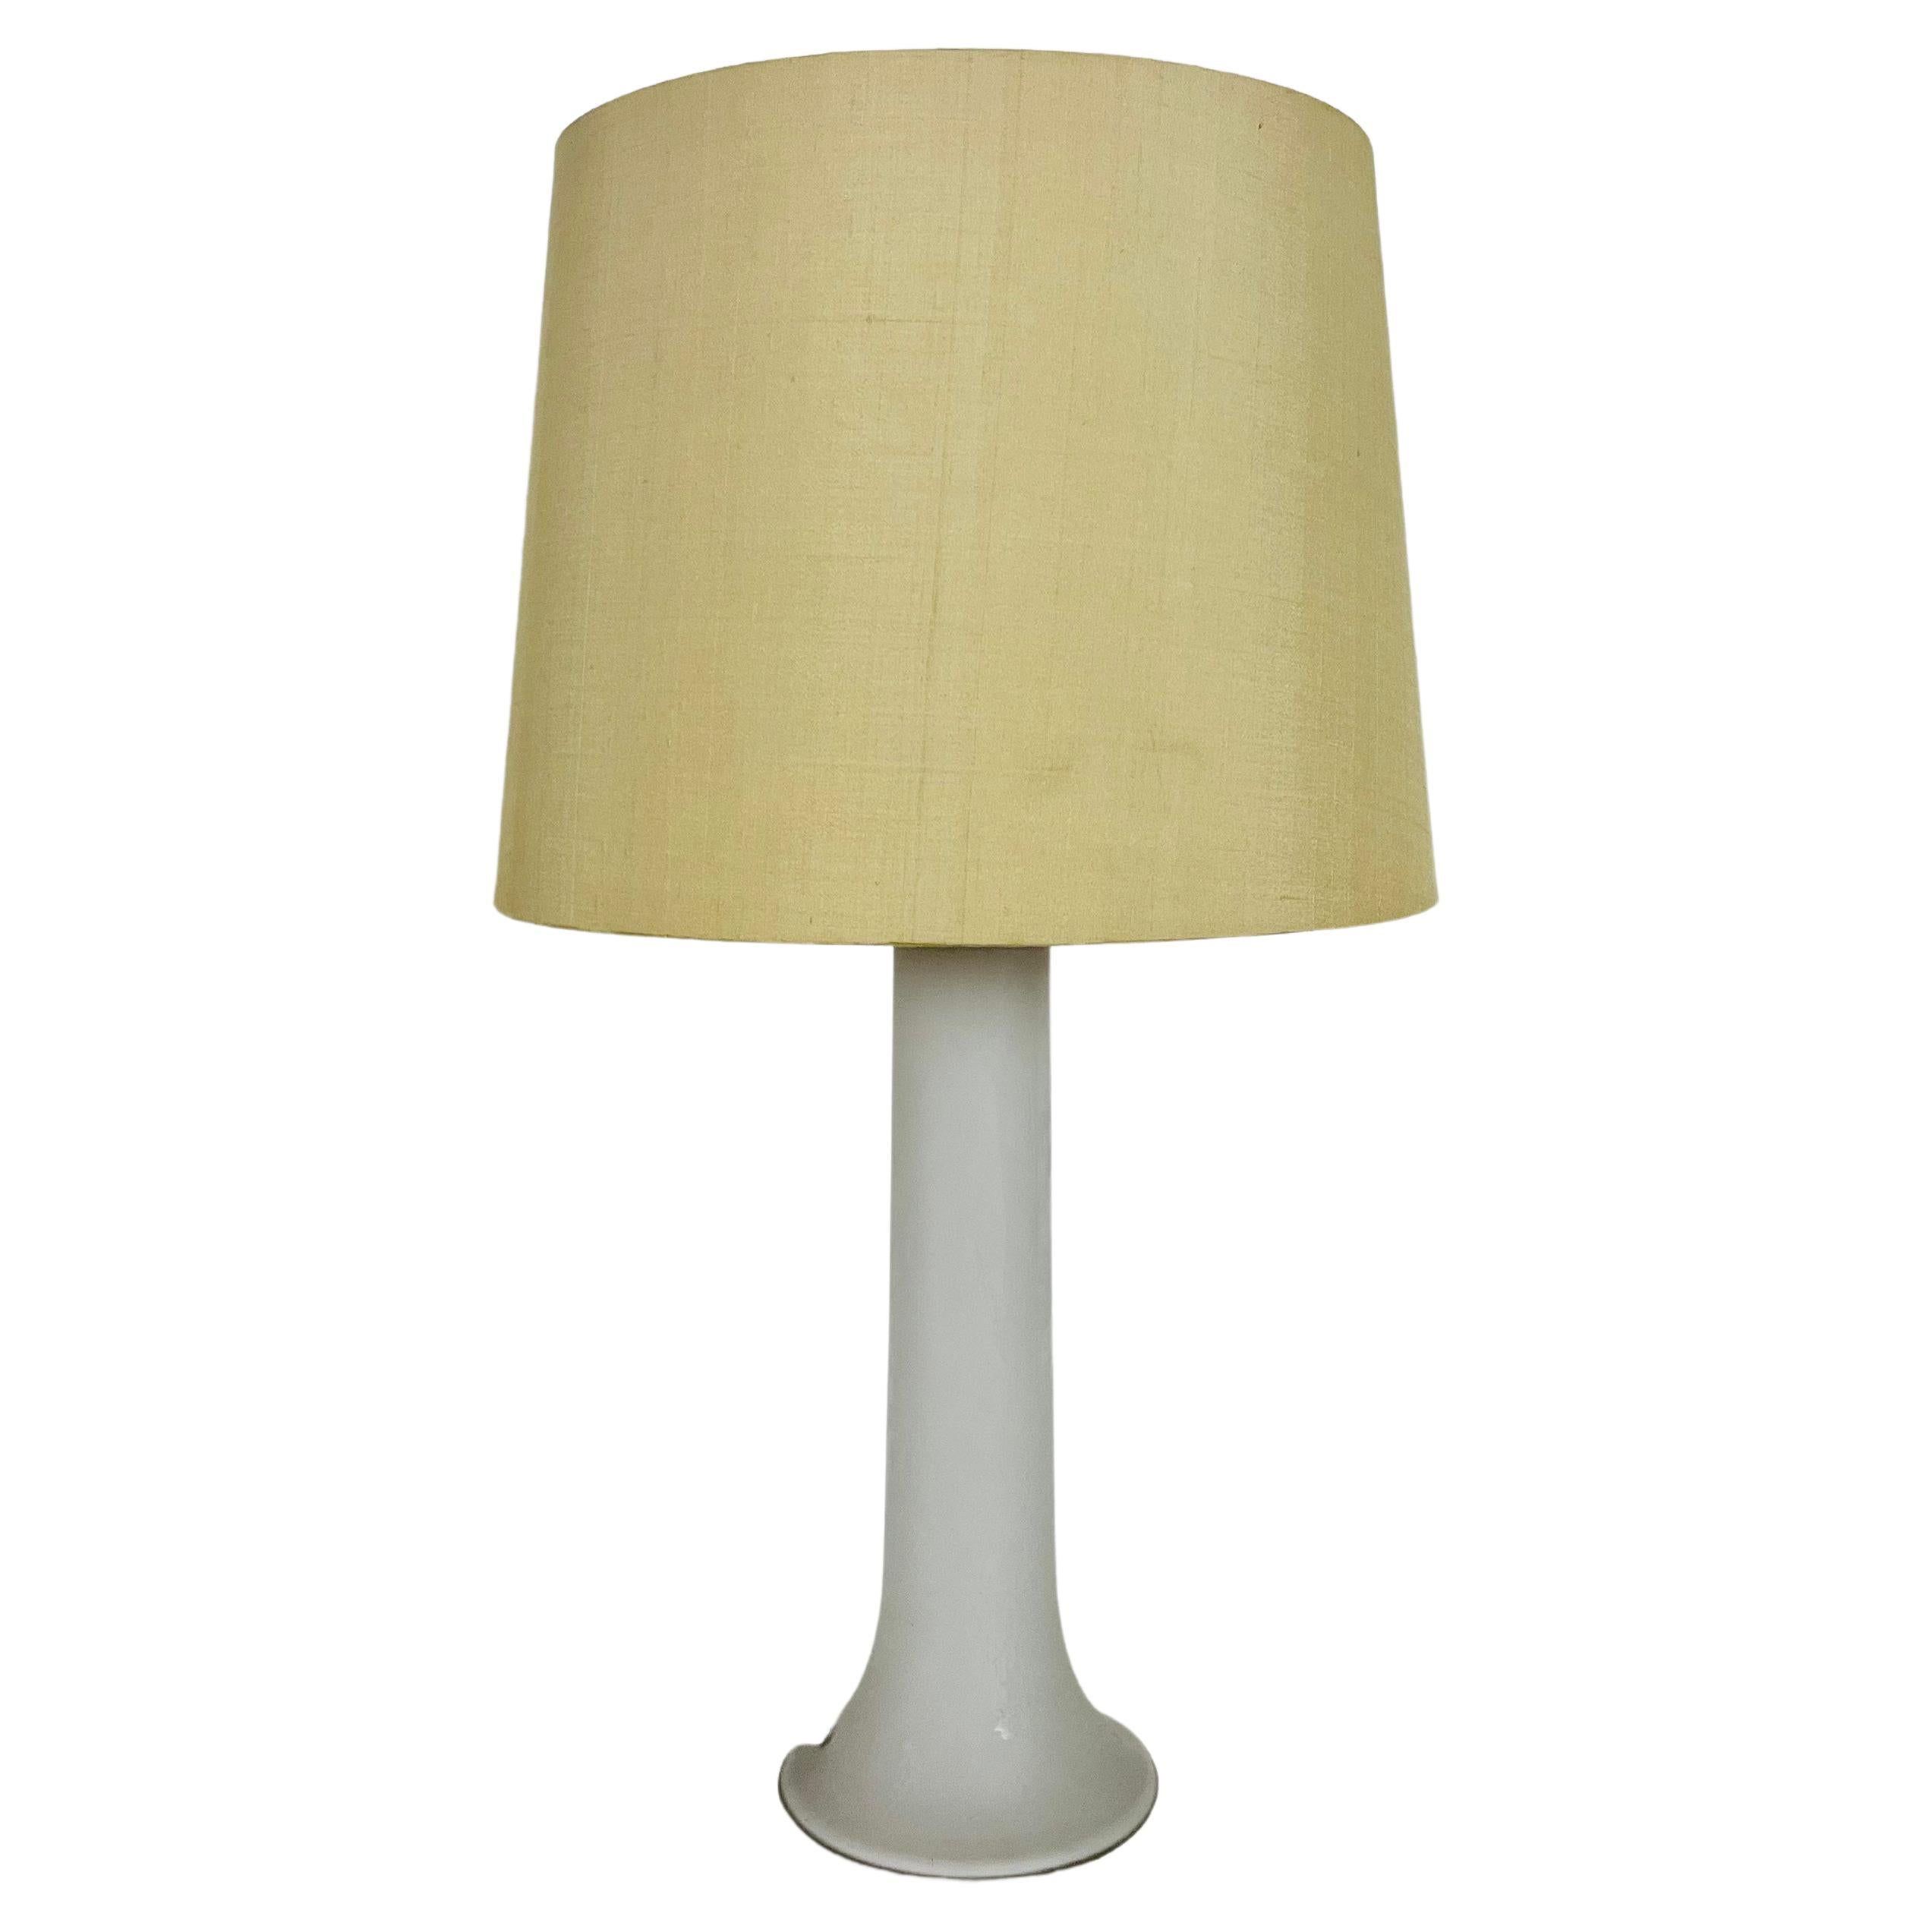 Mid Century White Glass and Fabric Shade Table Lamp by Luxus Sweden, 1960s For Sale